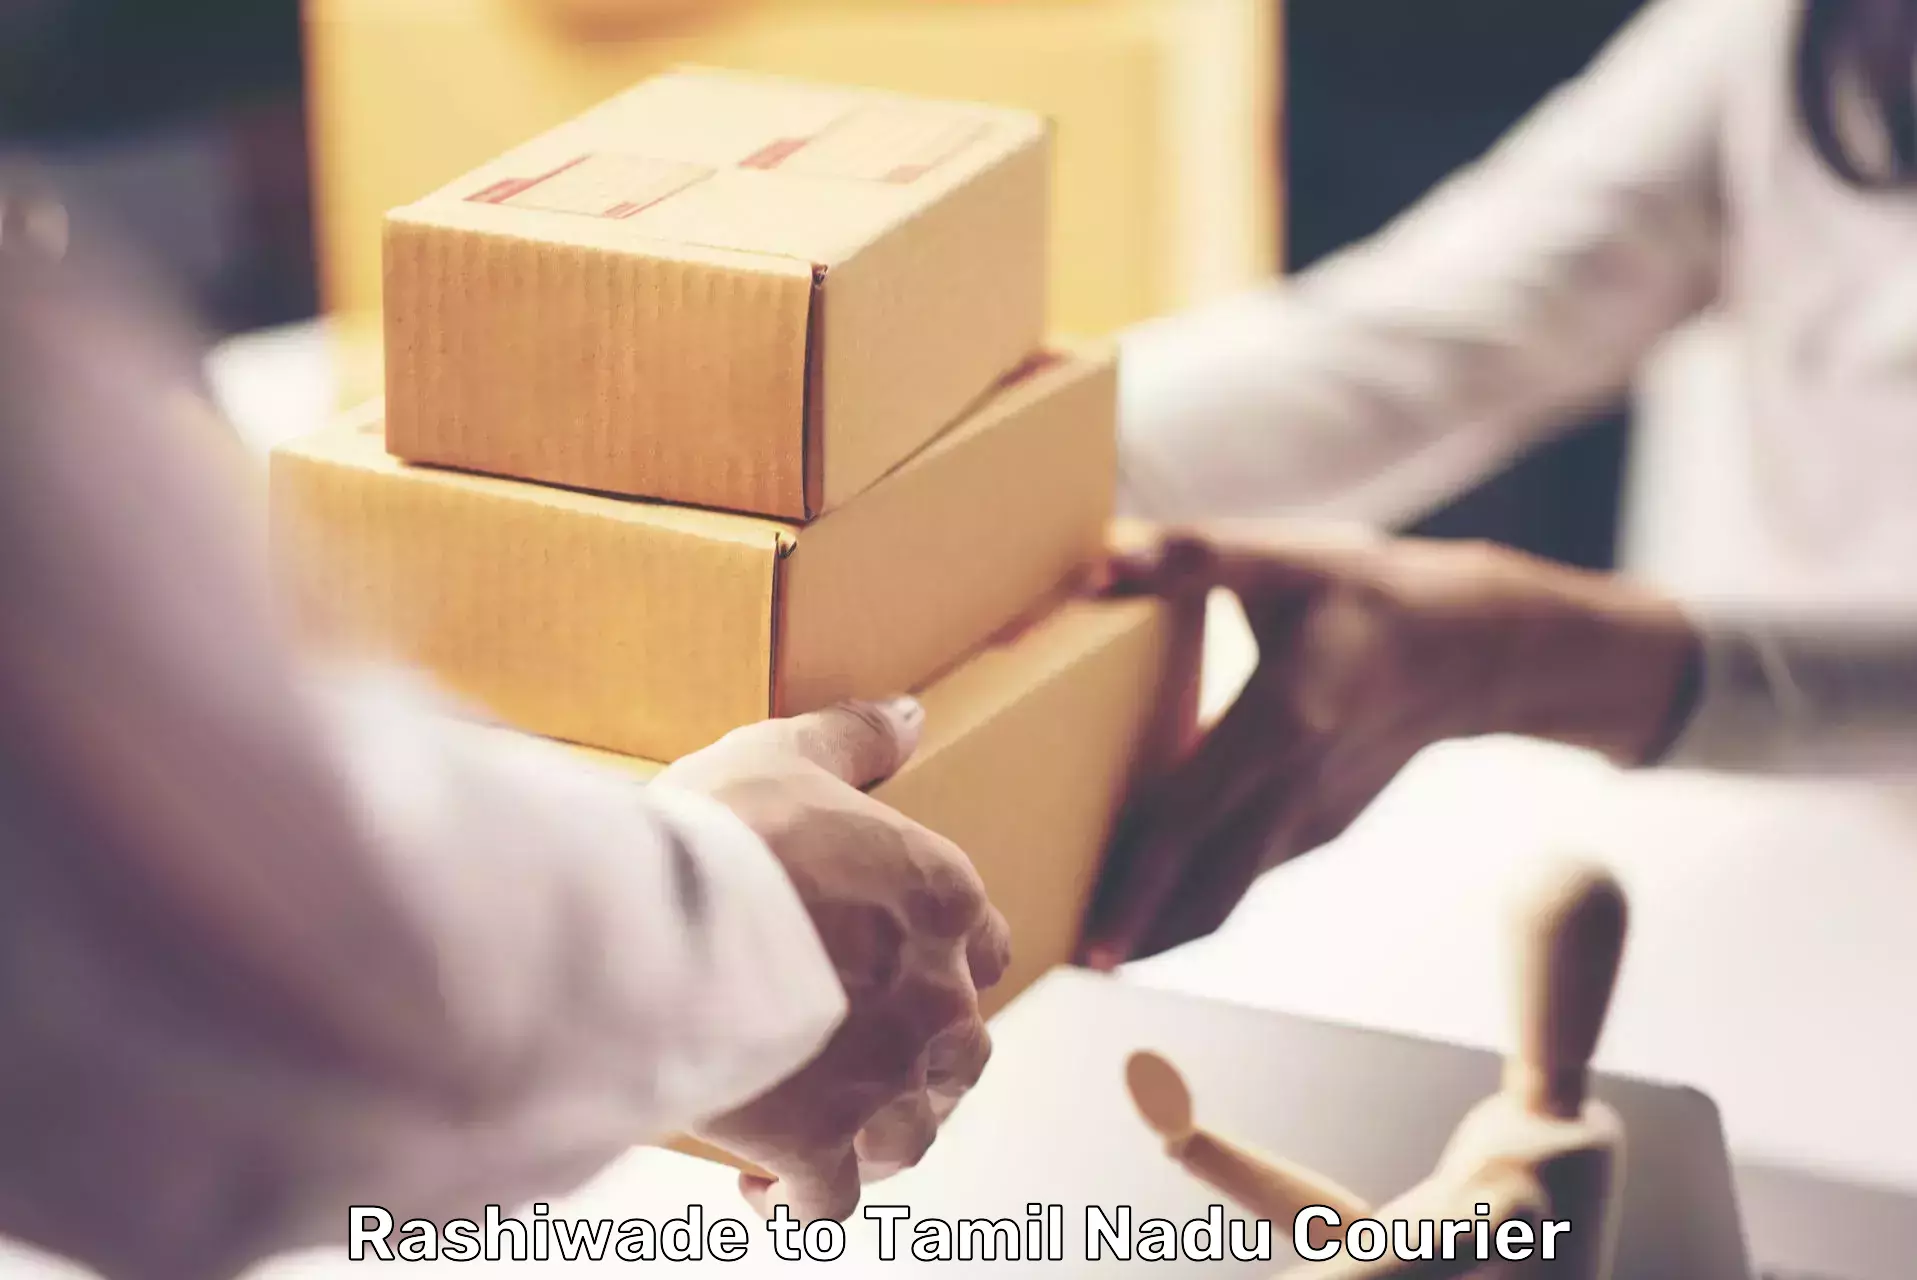 Personal parcel delivery Rashiwade to Ennore Port Chennai